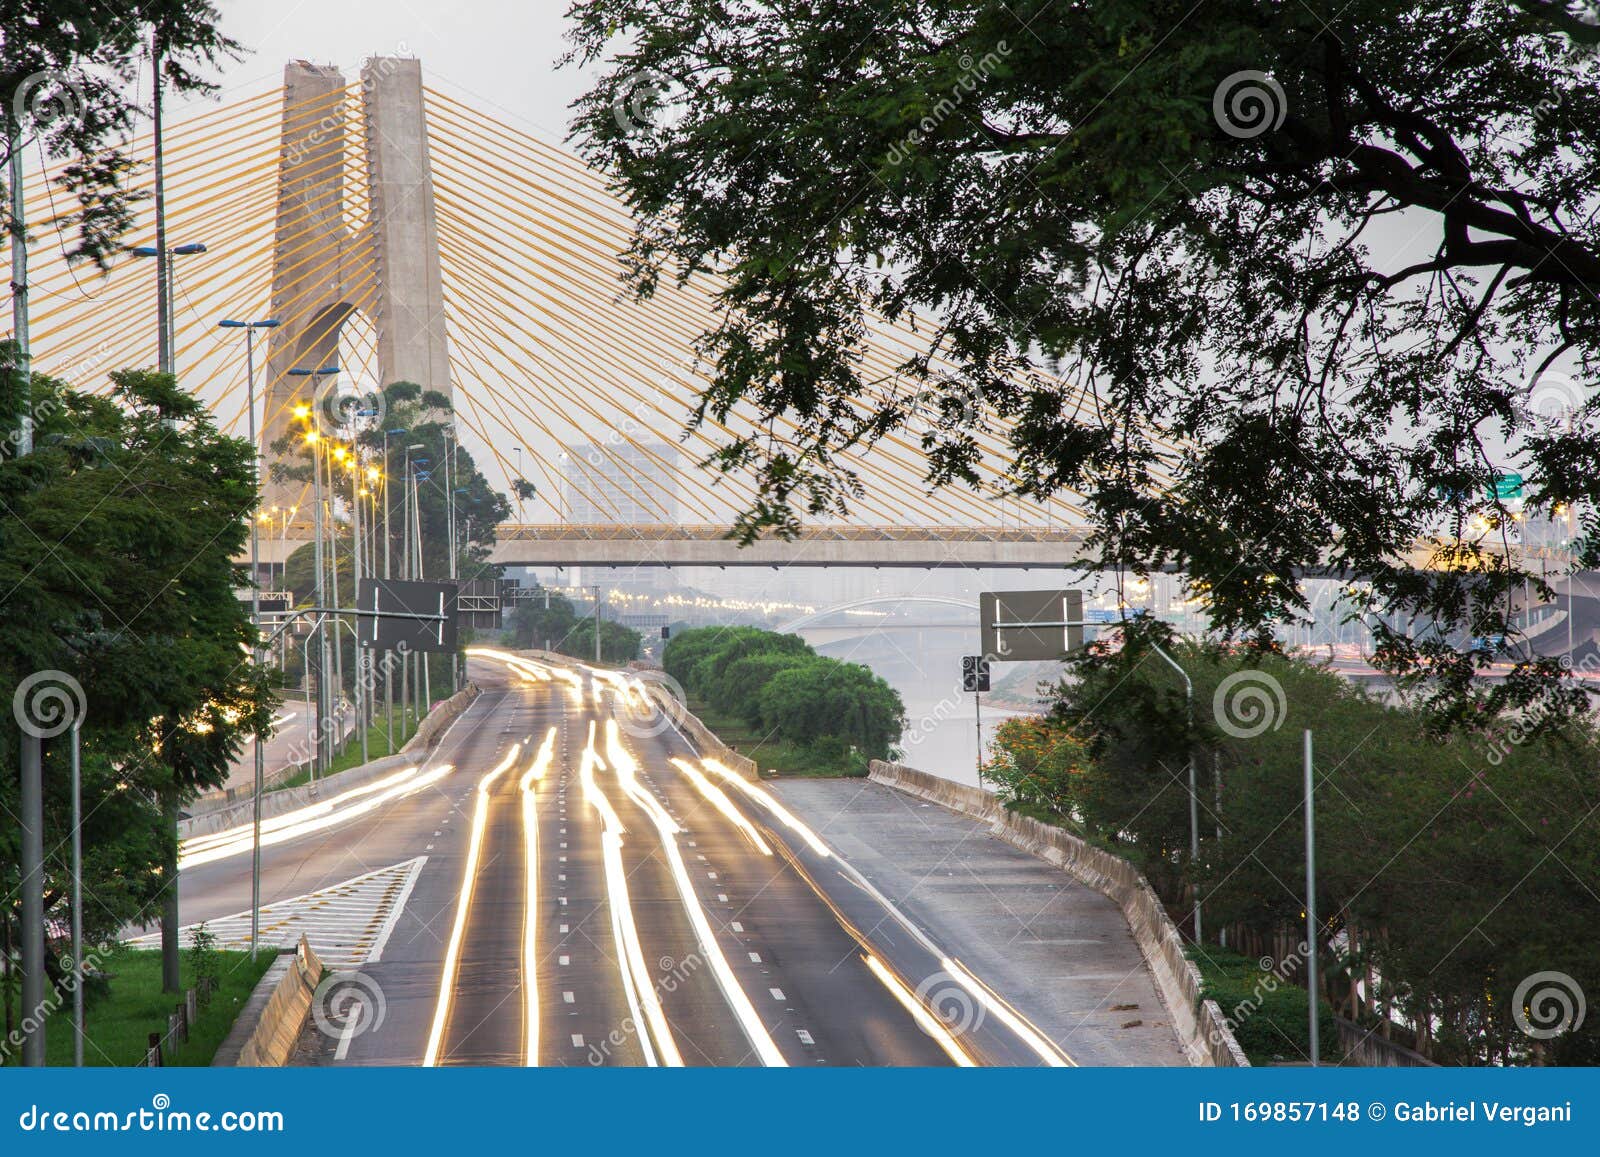 sunrise, bright lights and vehicles in transit. sao paulo city highway beside the river.